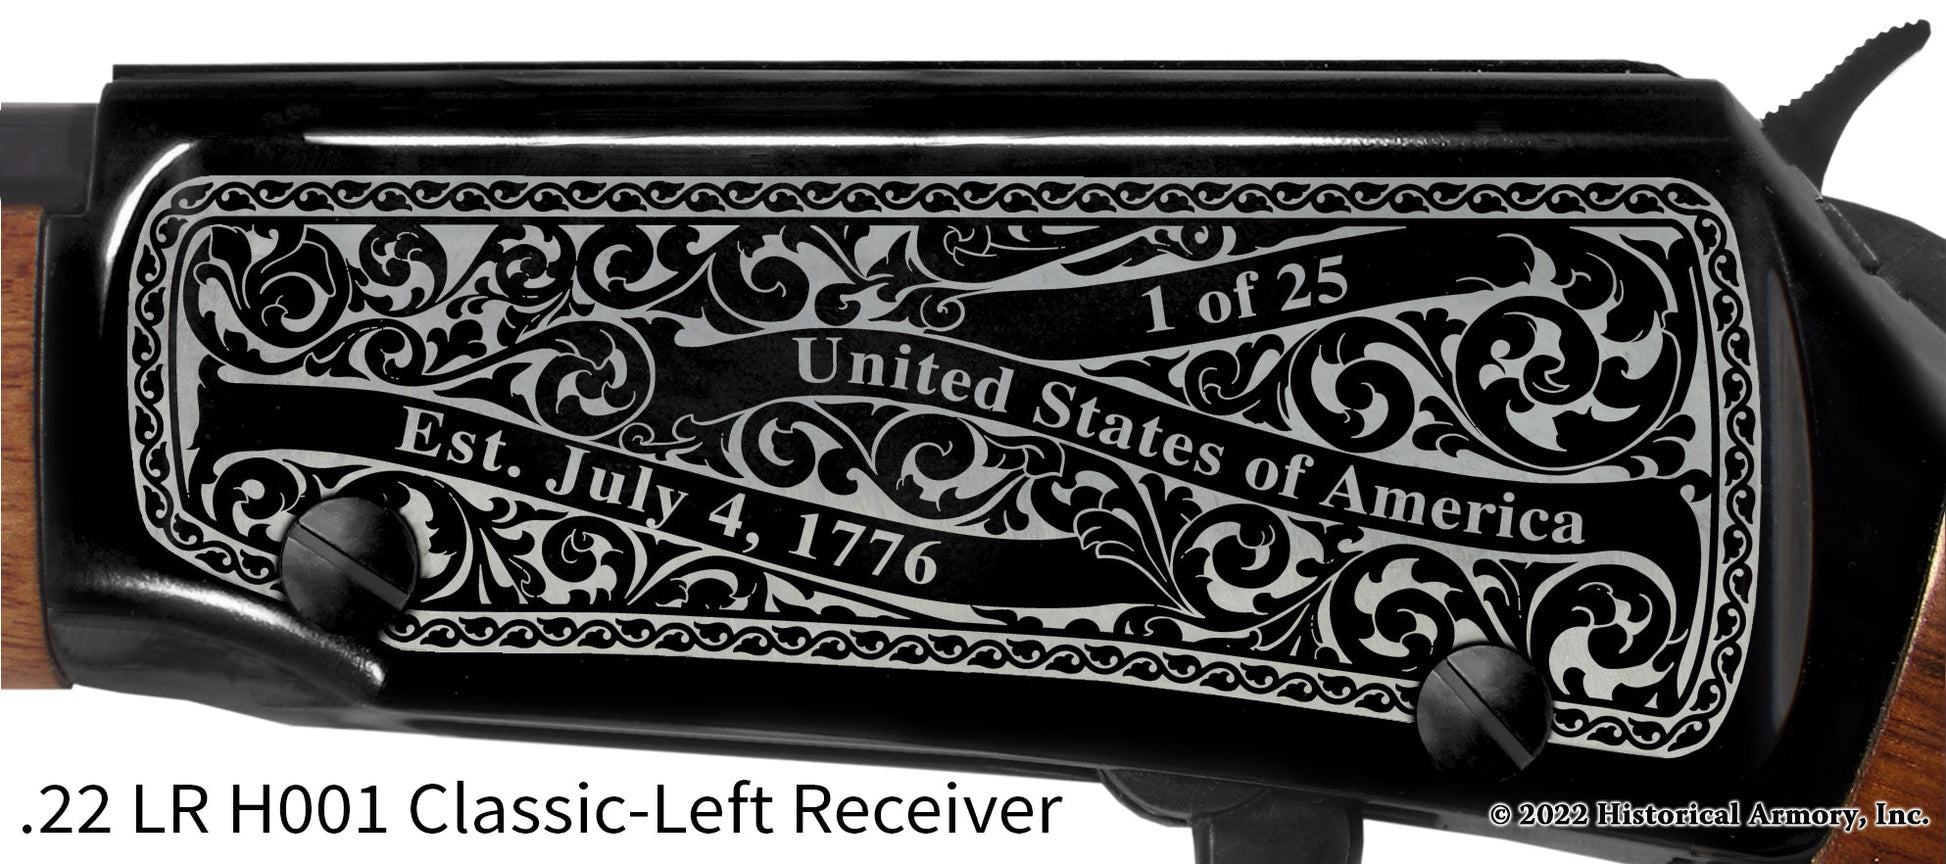 Luna County New Mexico Engraved Henry H001 Rifle